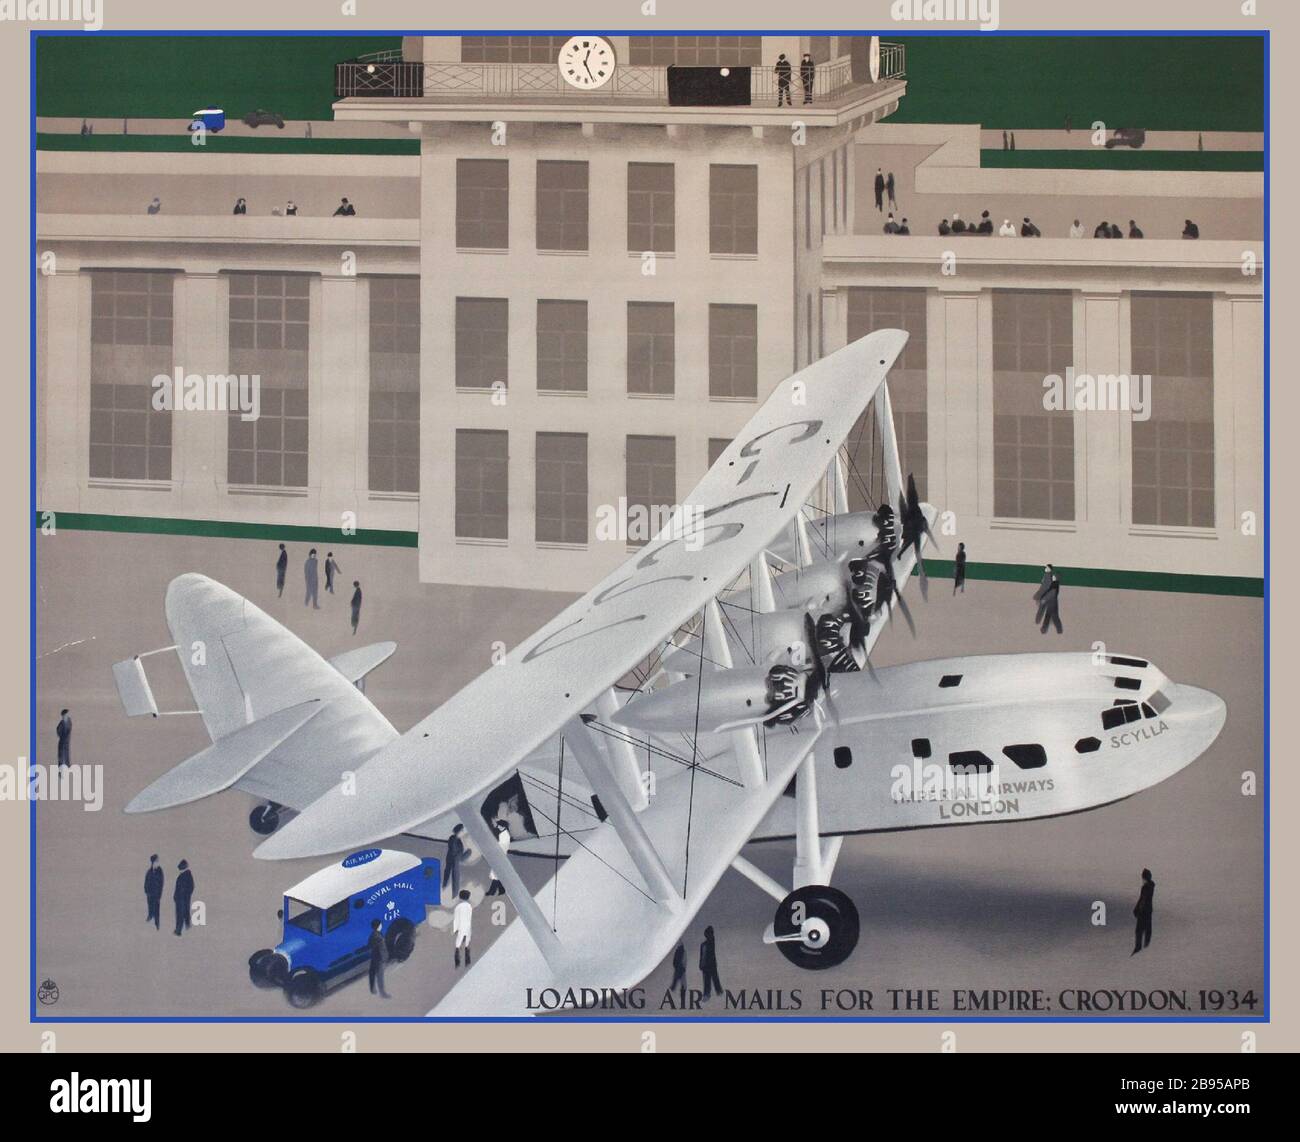 Vintage GPO AirMail Airplane Poster Croydon Airfield UK Loading Air Mails for the Empire: Croydon 1934, GPO poster H S Williamson (Harold Sandys 1892-1978) Stock Photo